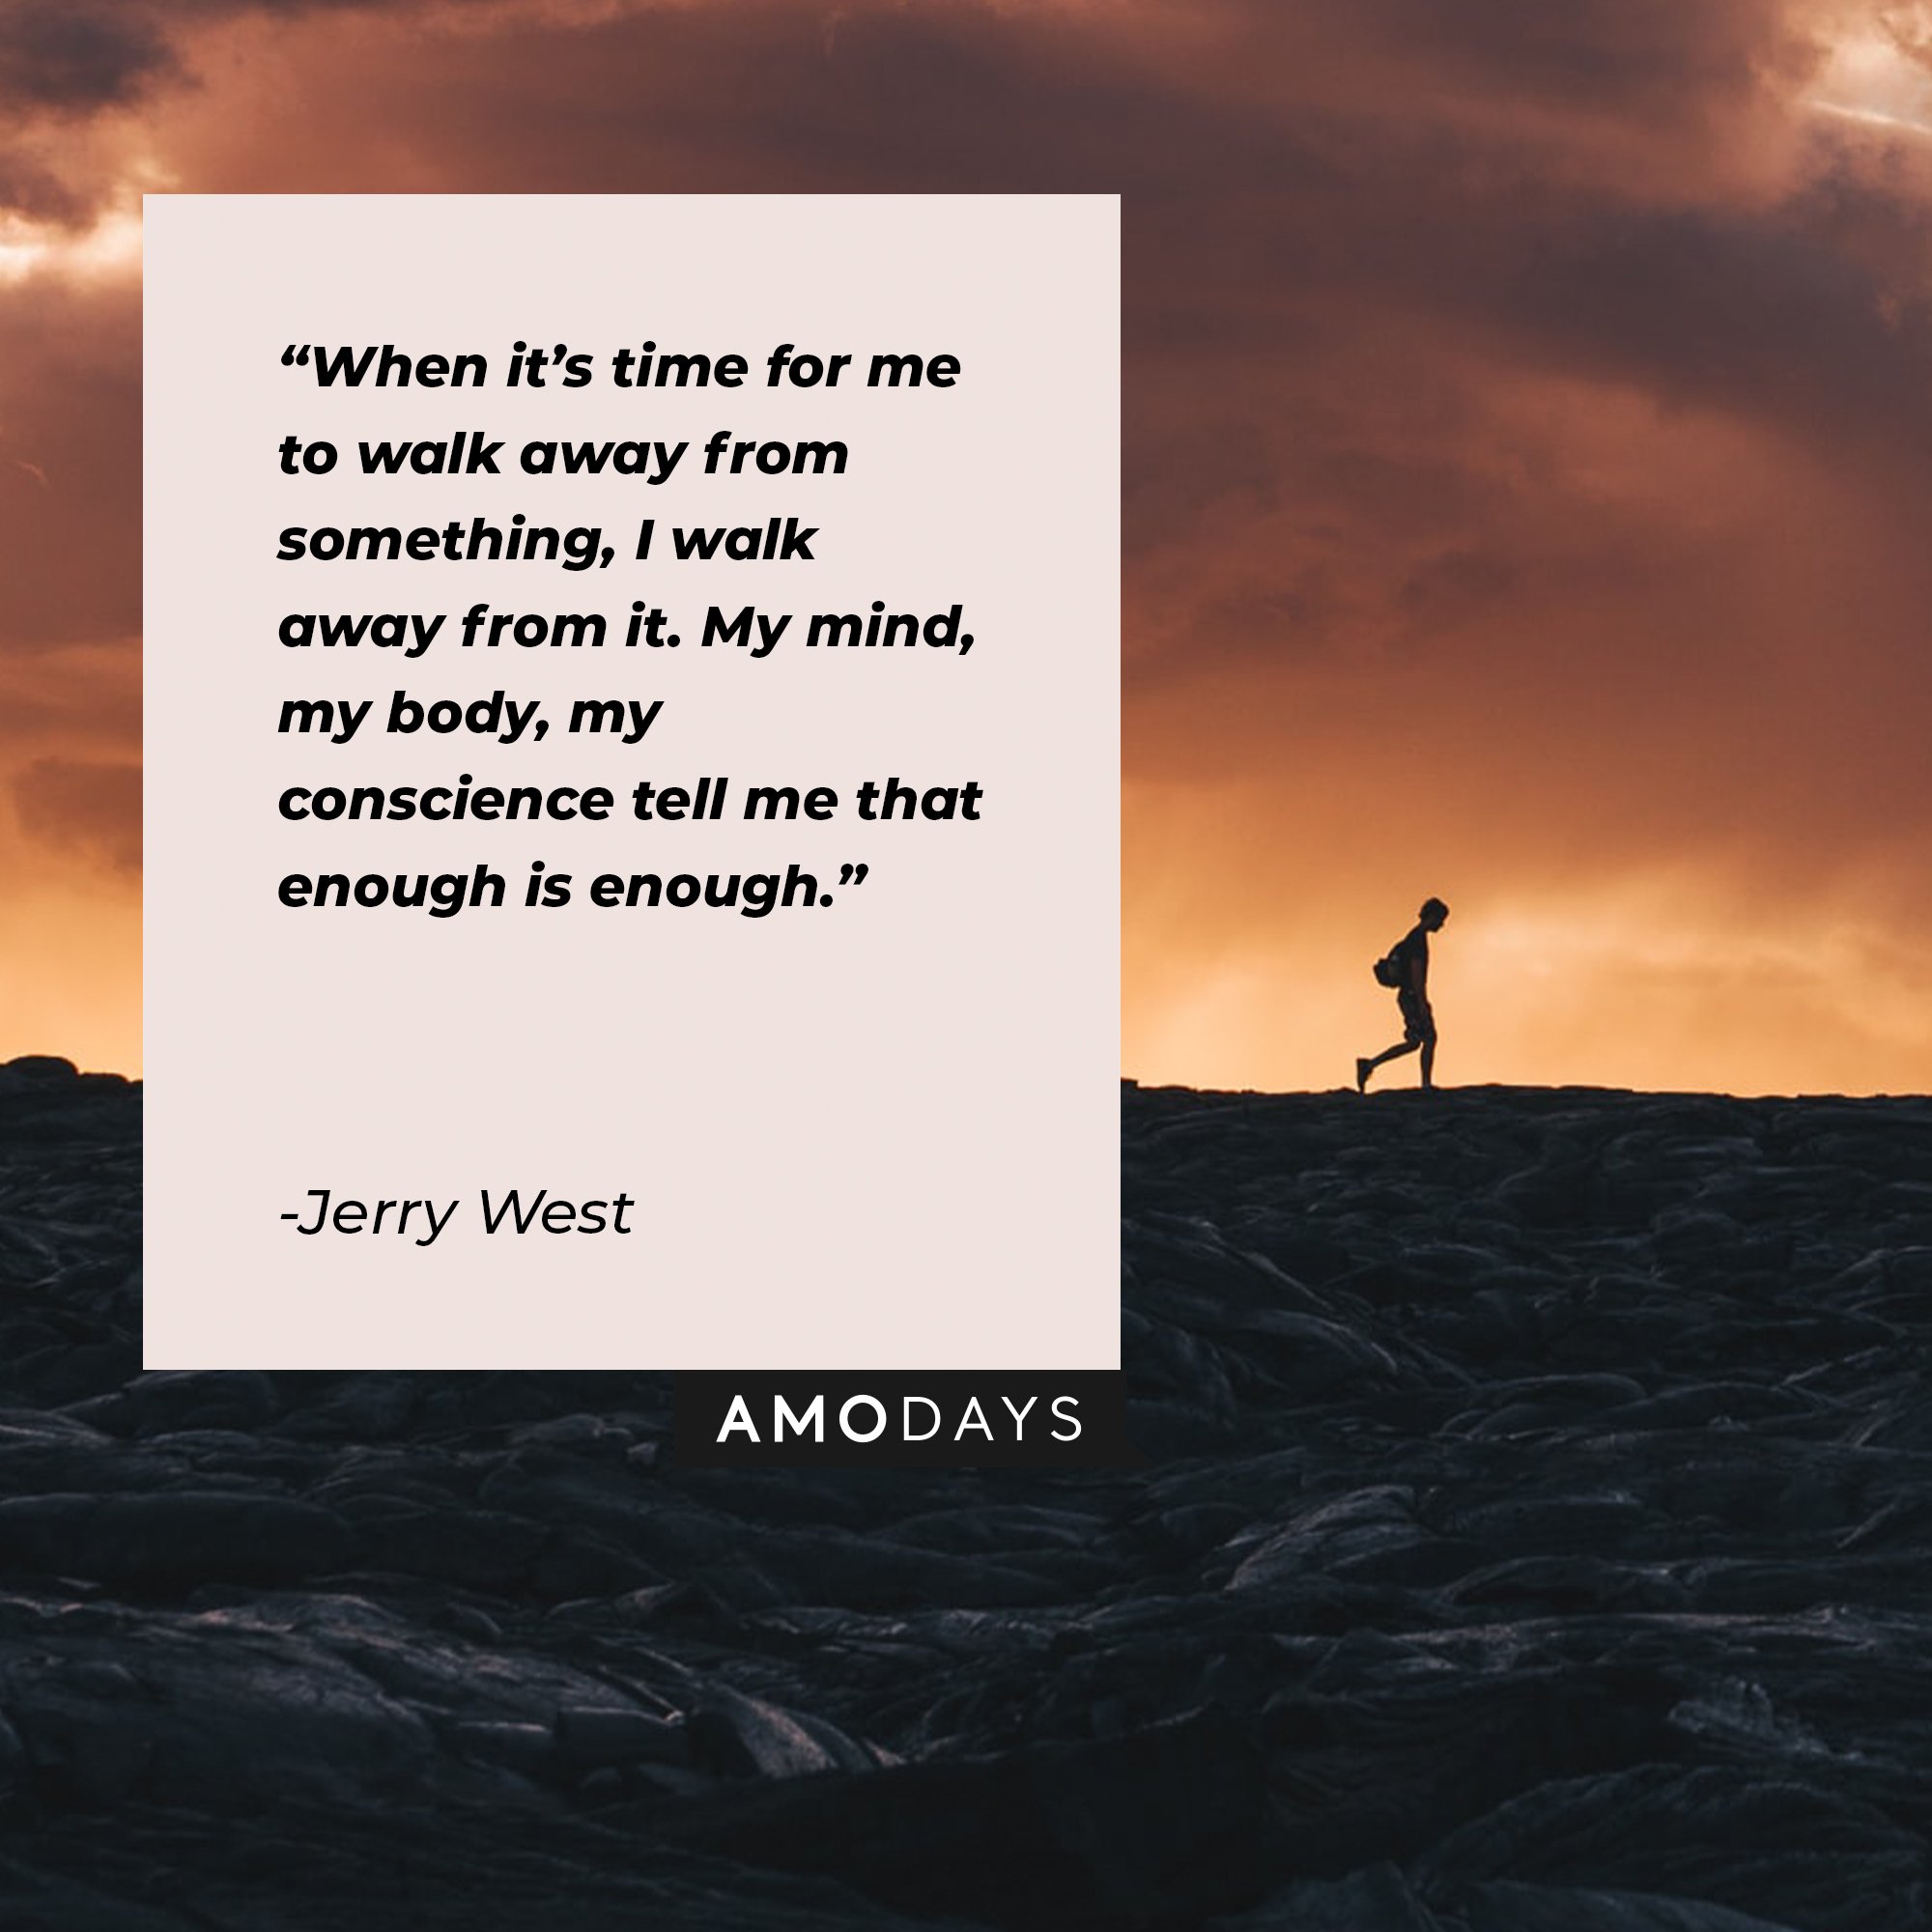 Jerry West’s quote: “When it’s time for me to walk away from something, I walk away from it. My mind, my body, my conscience tell me that enough is enough.” | Image: AmoDays 